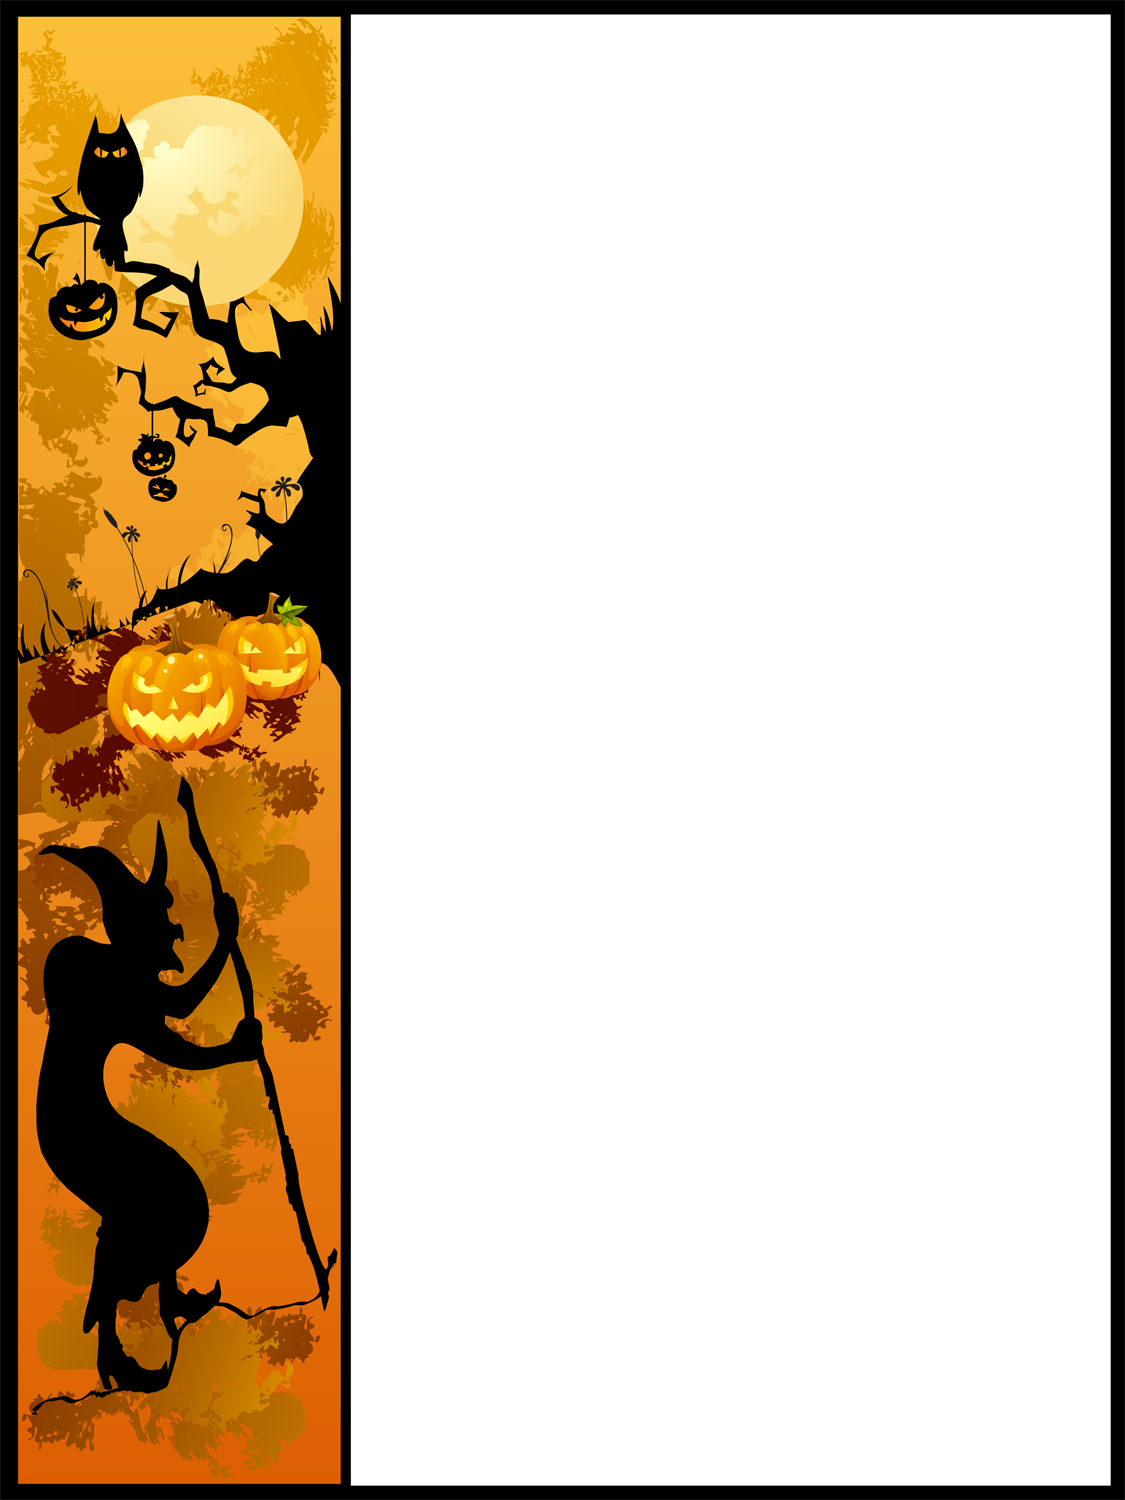 Halloween border clipart free images 7